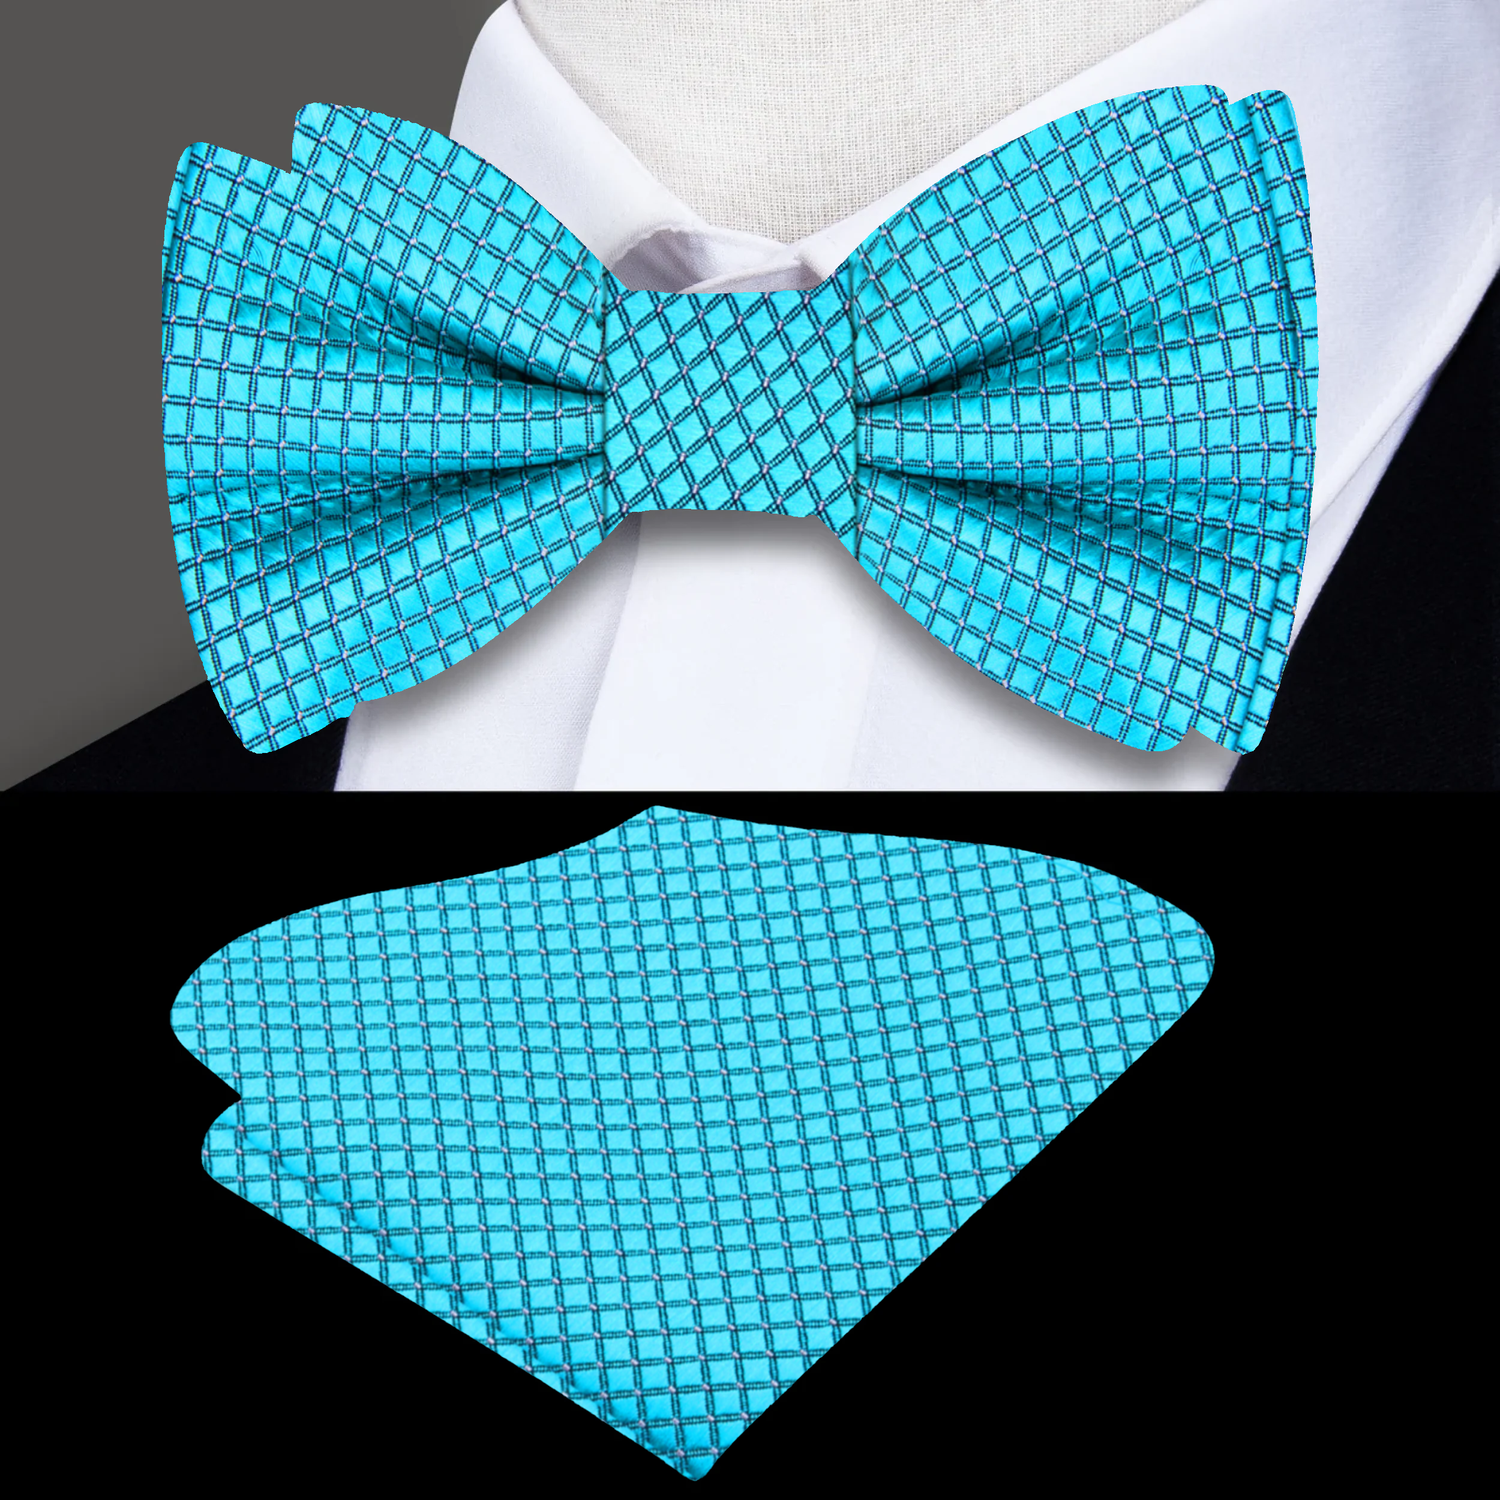 Main View: Teal with White Geometric Texture Bow Tie and Pocket Square